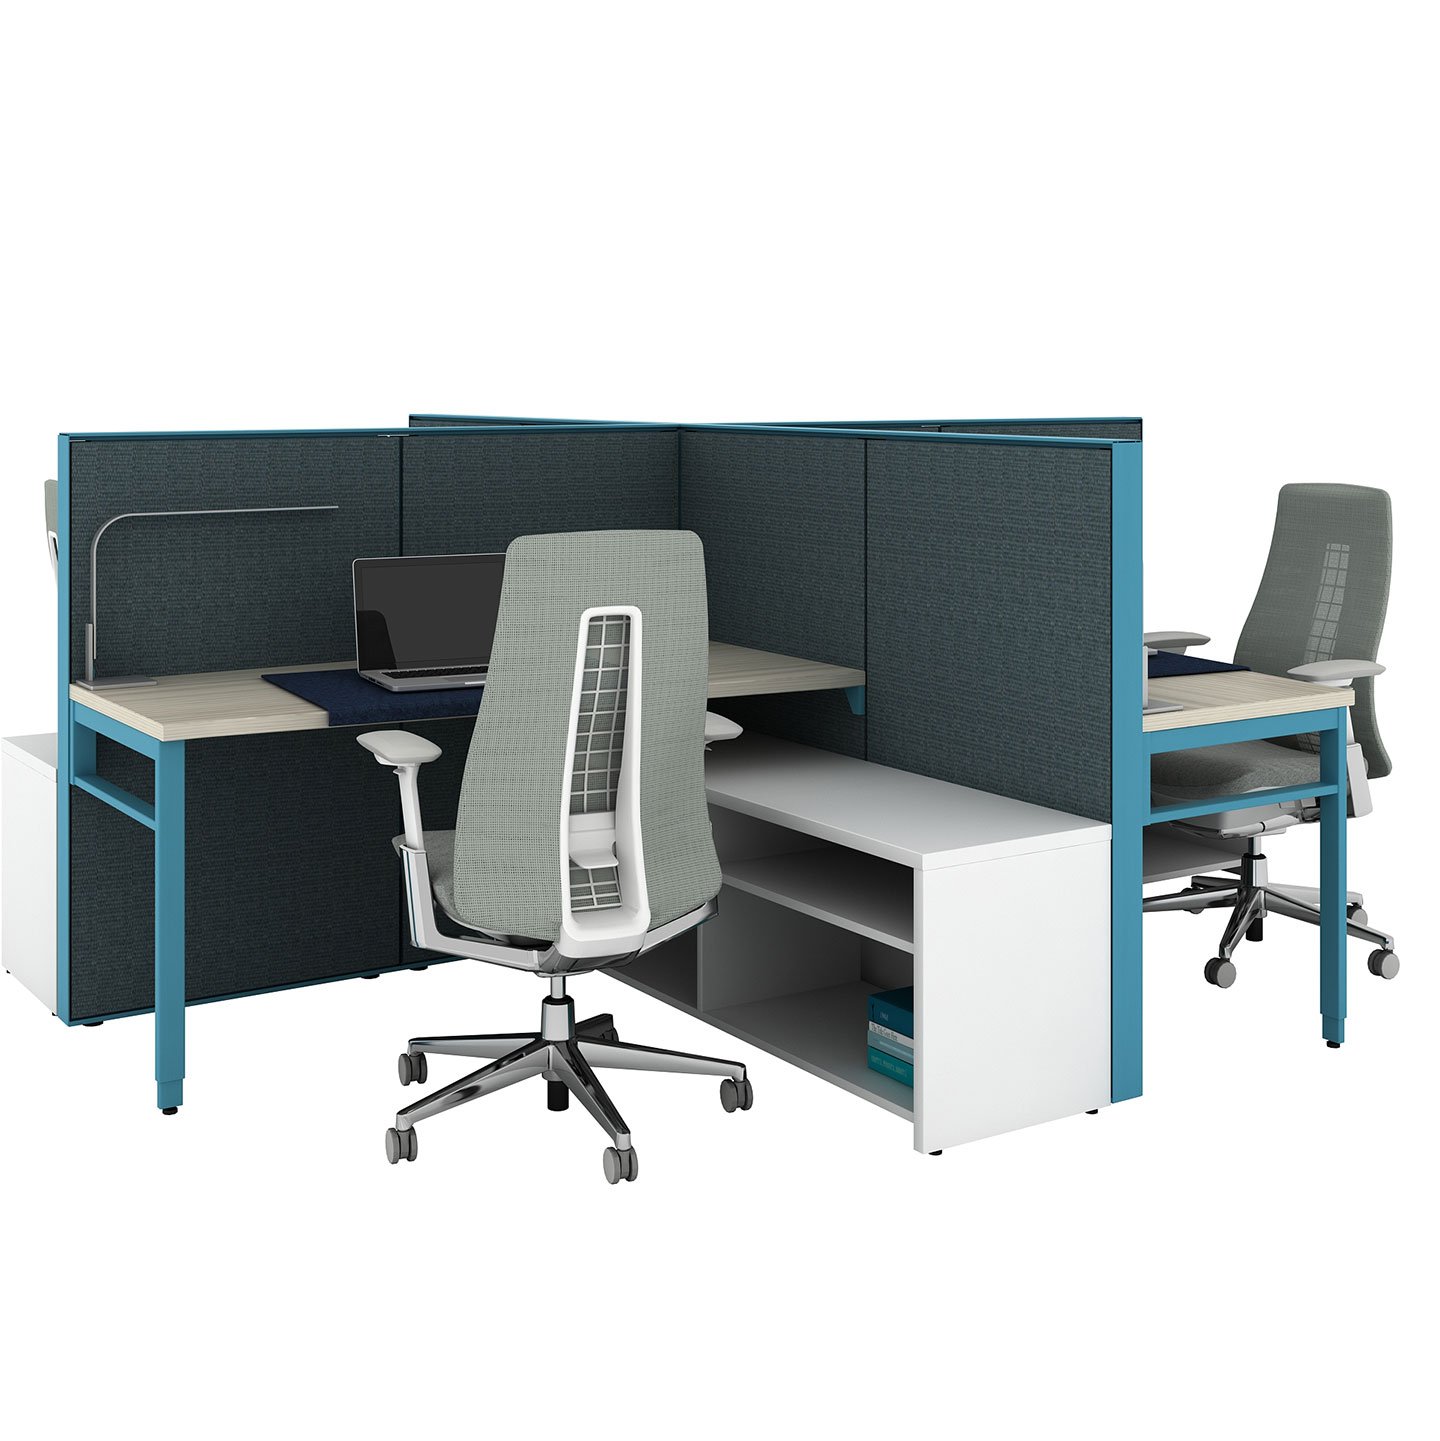 Haworth Compose Workspace in mock office space with multiple dividers for desk privacy and fern chairs with side storage for files